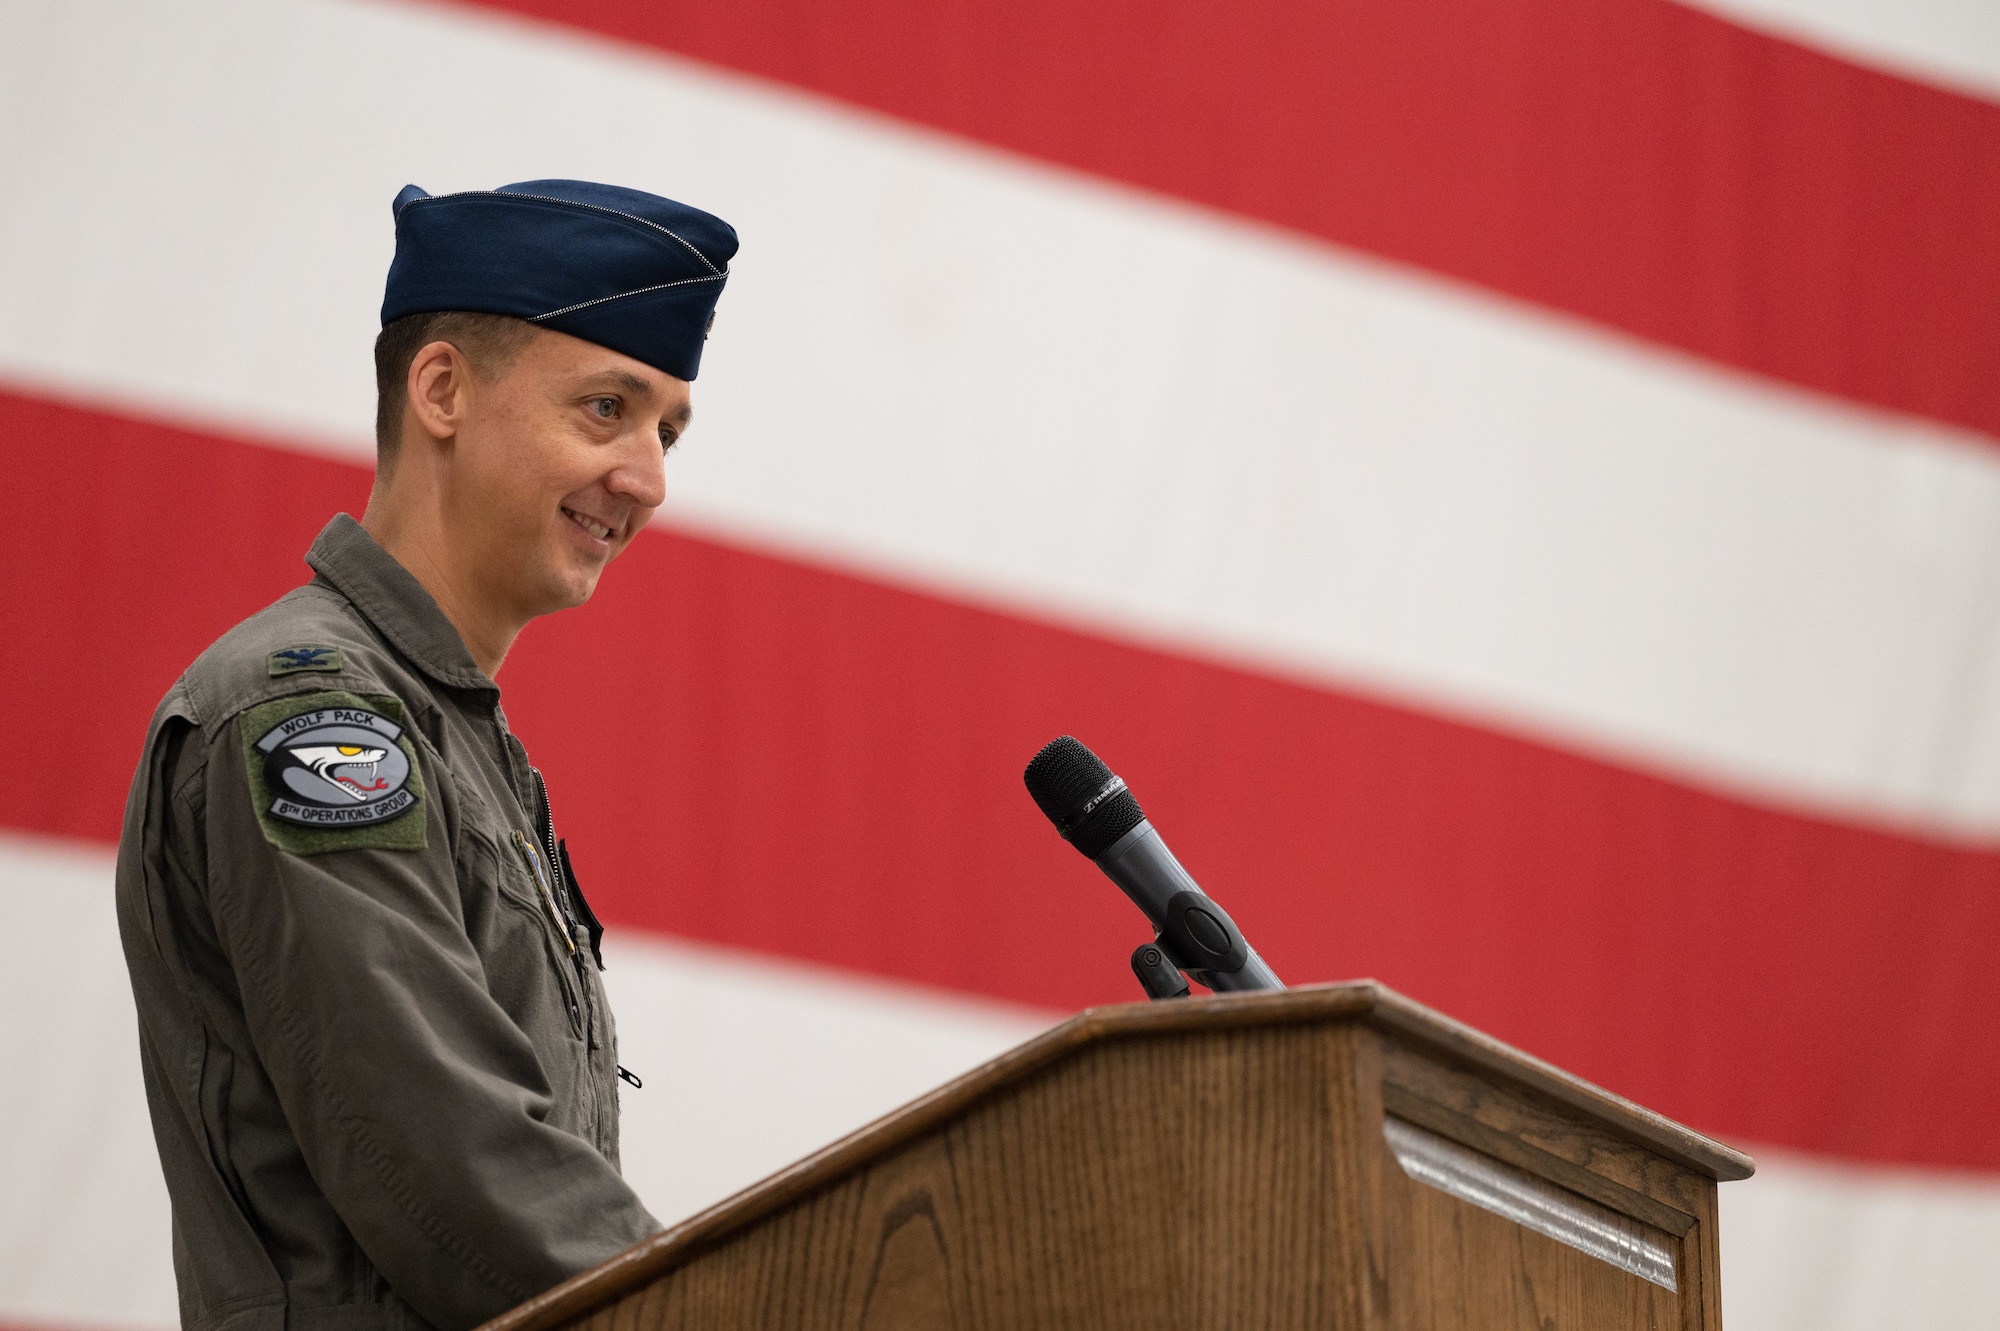 Col. Michael G. McCarthy, 8th Operations Group incoming commander, gives remarks during the 8th OG change of command ceremony at Kunsan Air Base, Republic of Korea, June 2, 2023. The 8th OG commander is responsible for conventional air-to-ground and air-to-air missions in support of armistice and wartime taskings to defend the Republic of Korea. (U.S. Air Force photo by Staff Sgt. Sadie Colbert)